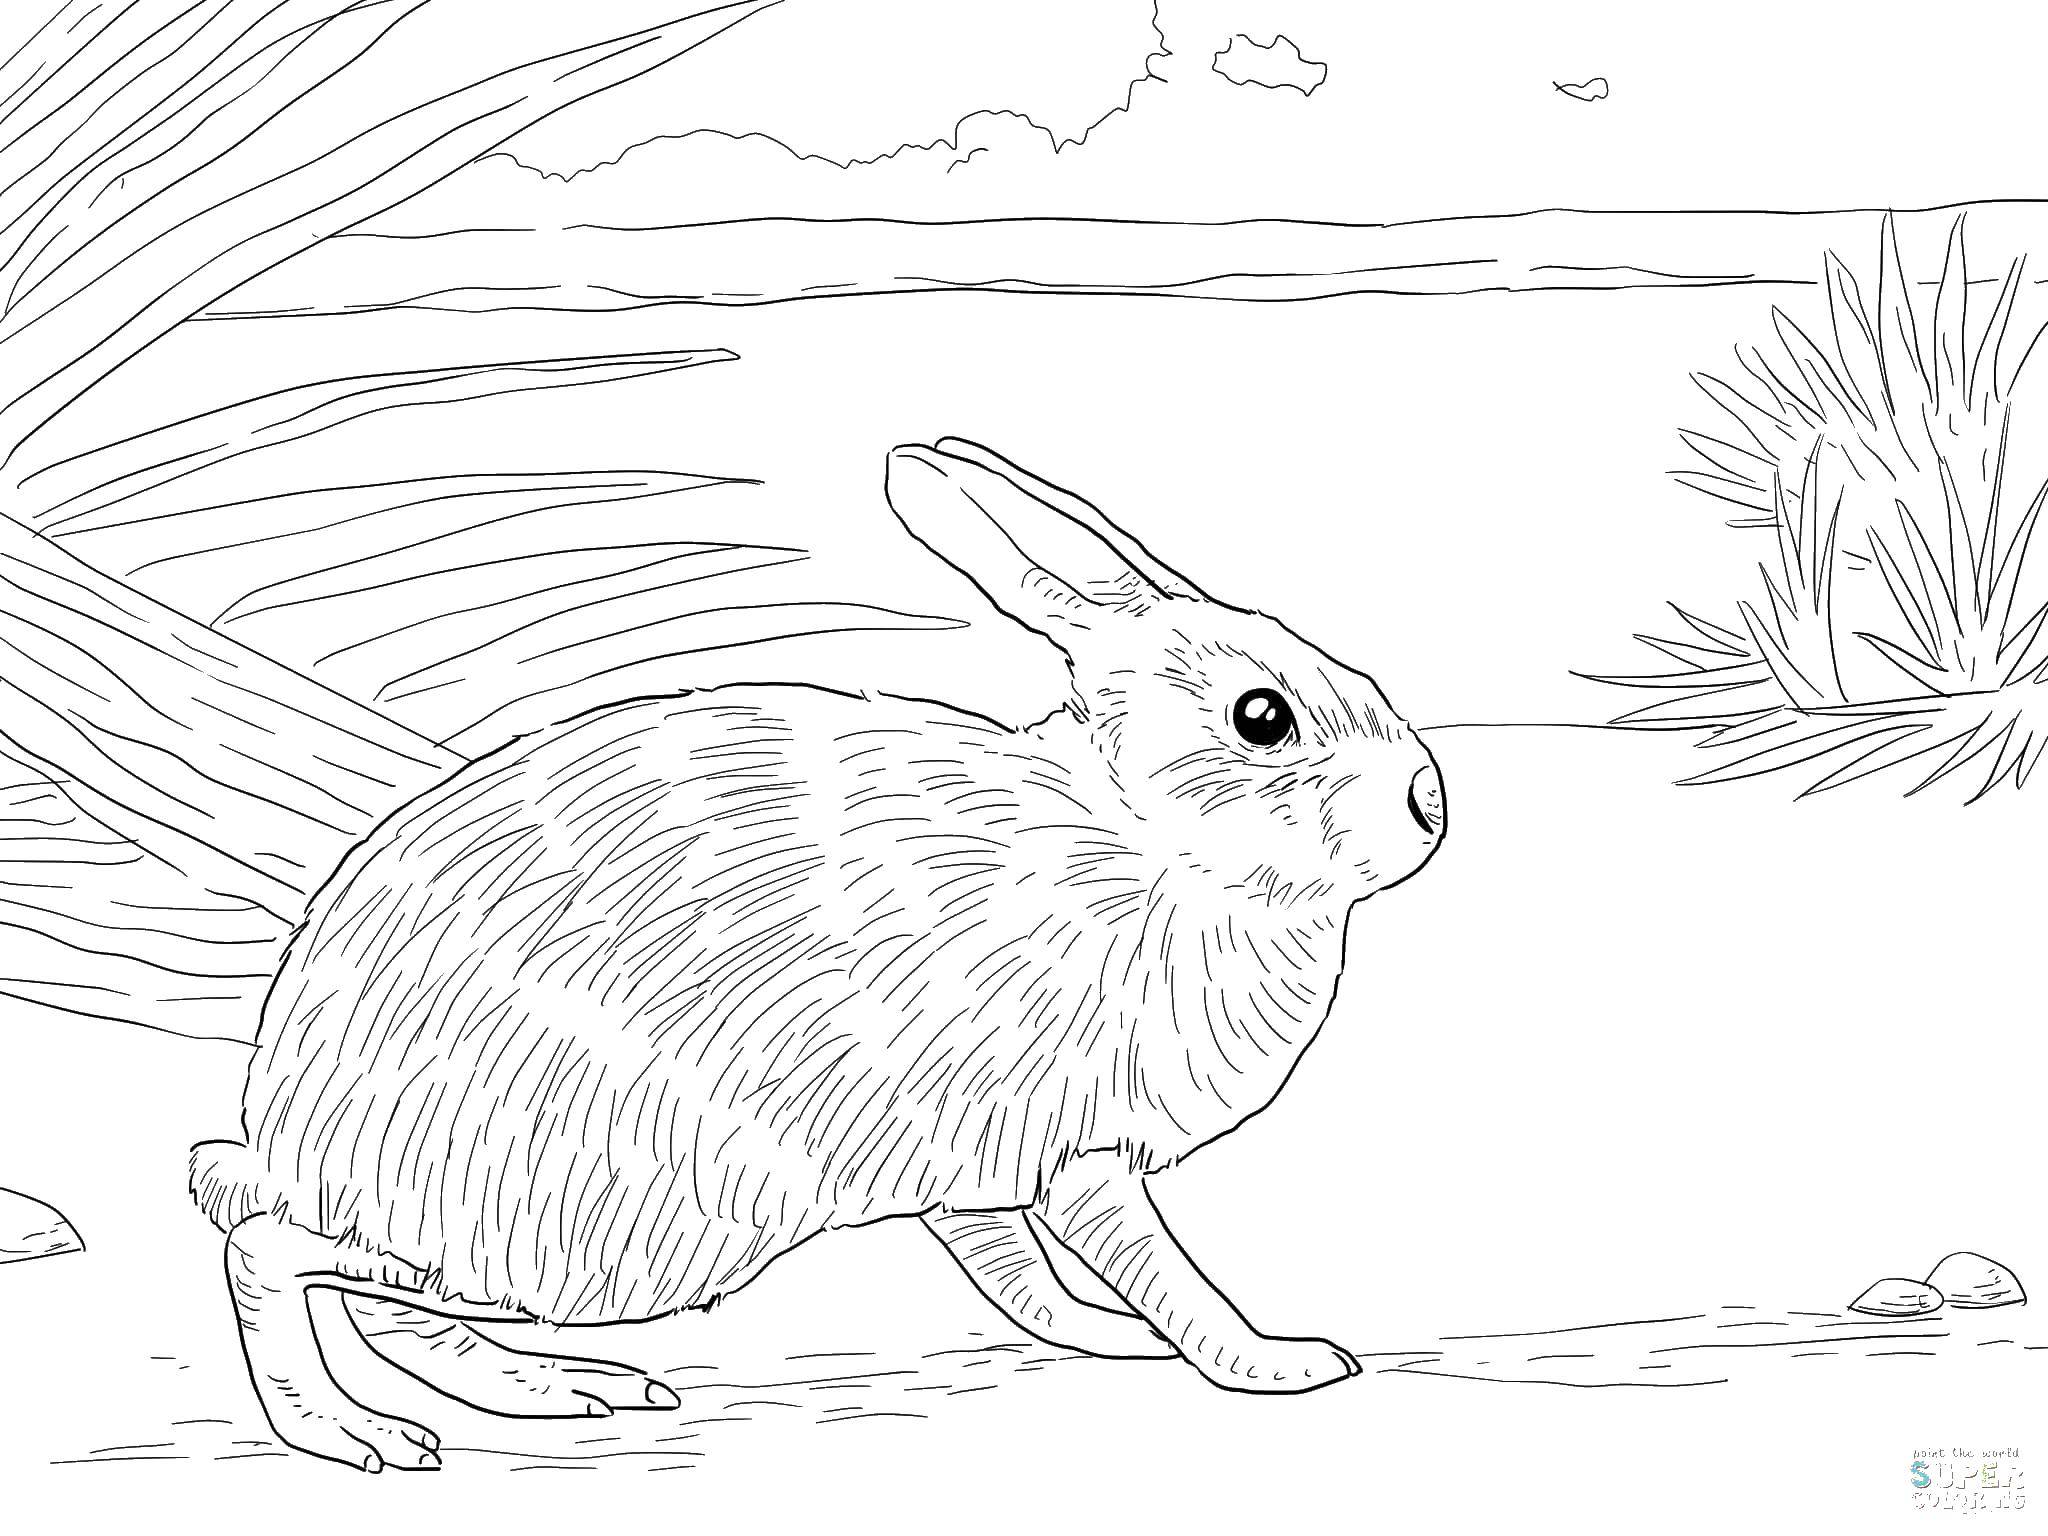 Coloring Bunny in field. Category the rabbit. Tags:  field, rabbit.